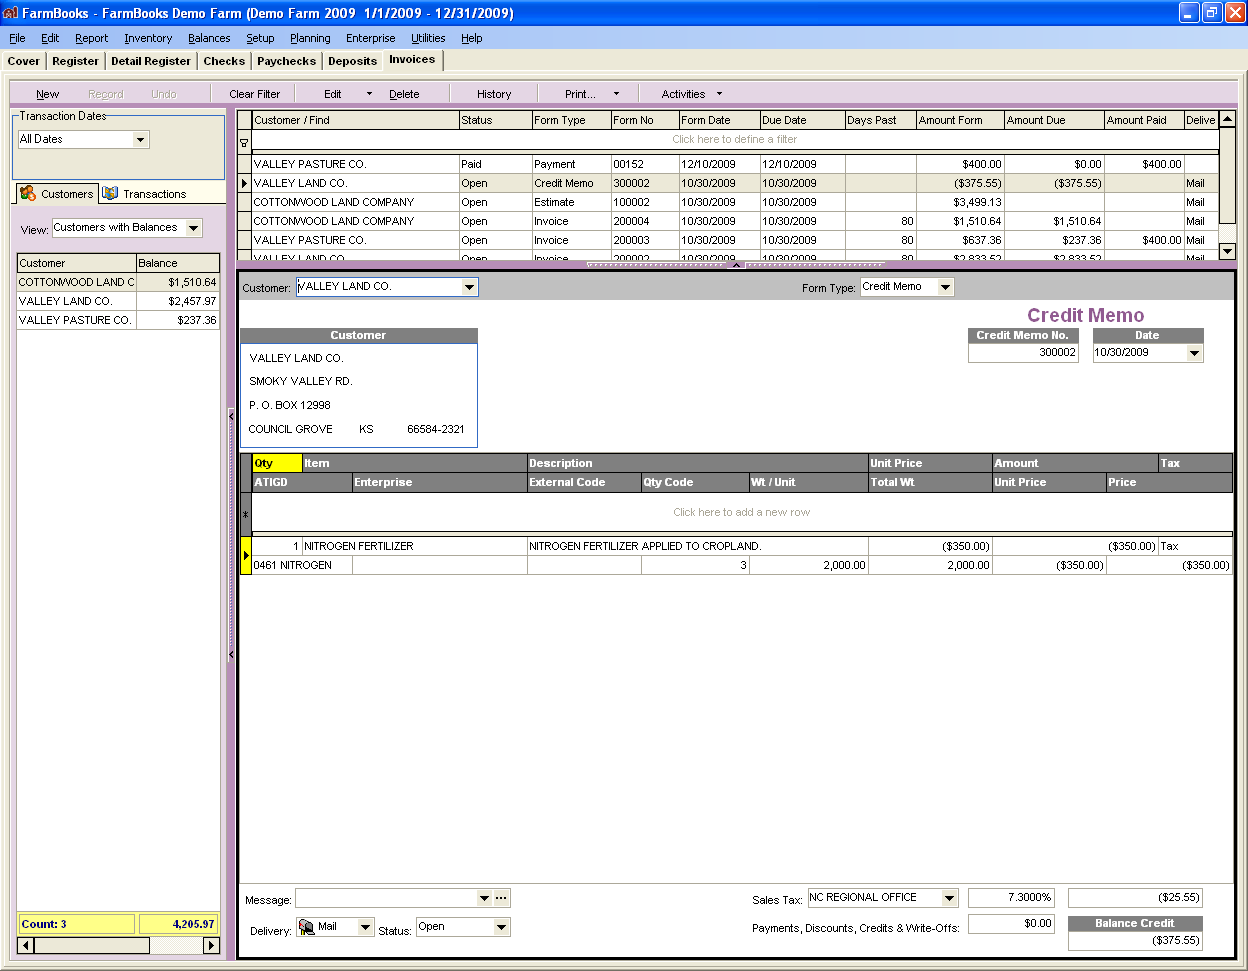 FarmBooks Invoice screen showing Customer, Date, Number, Description, Quanty, Price and Tax fields